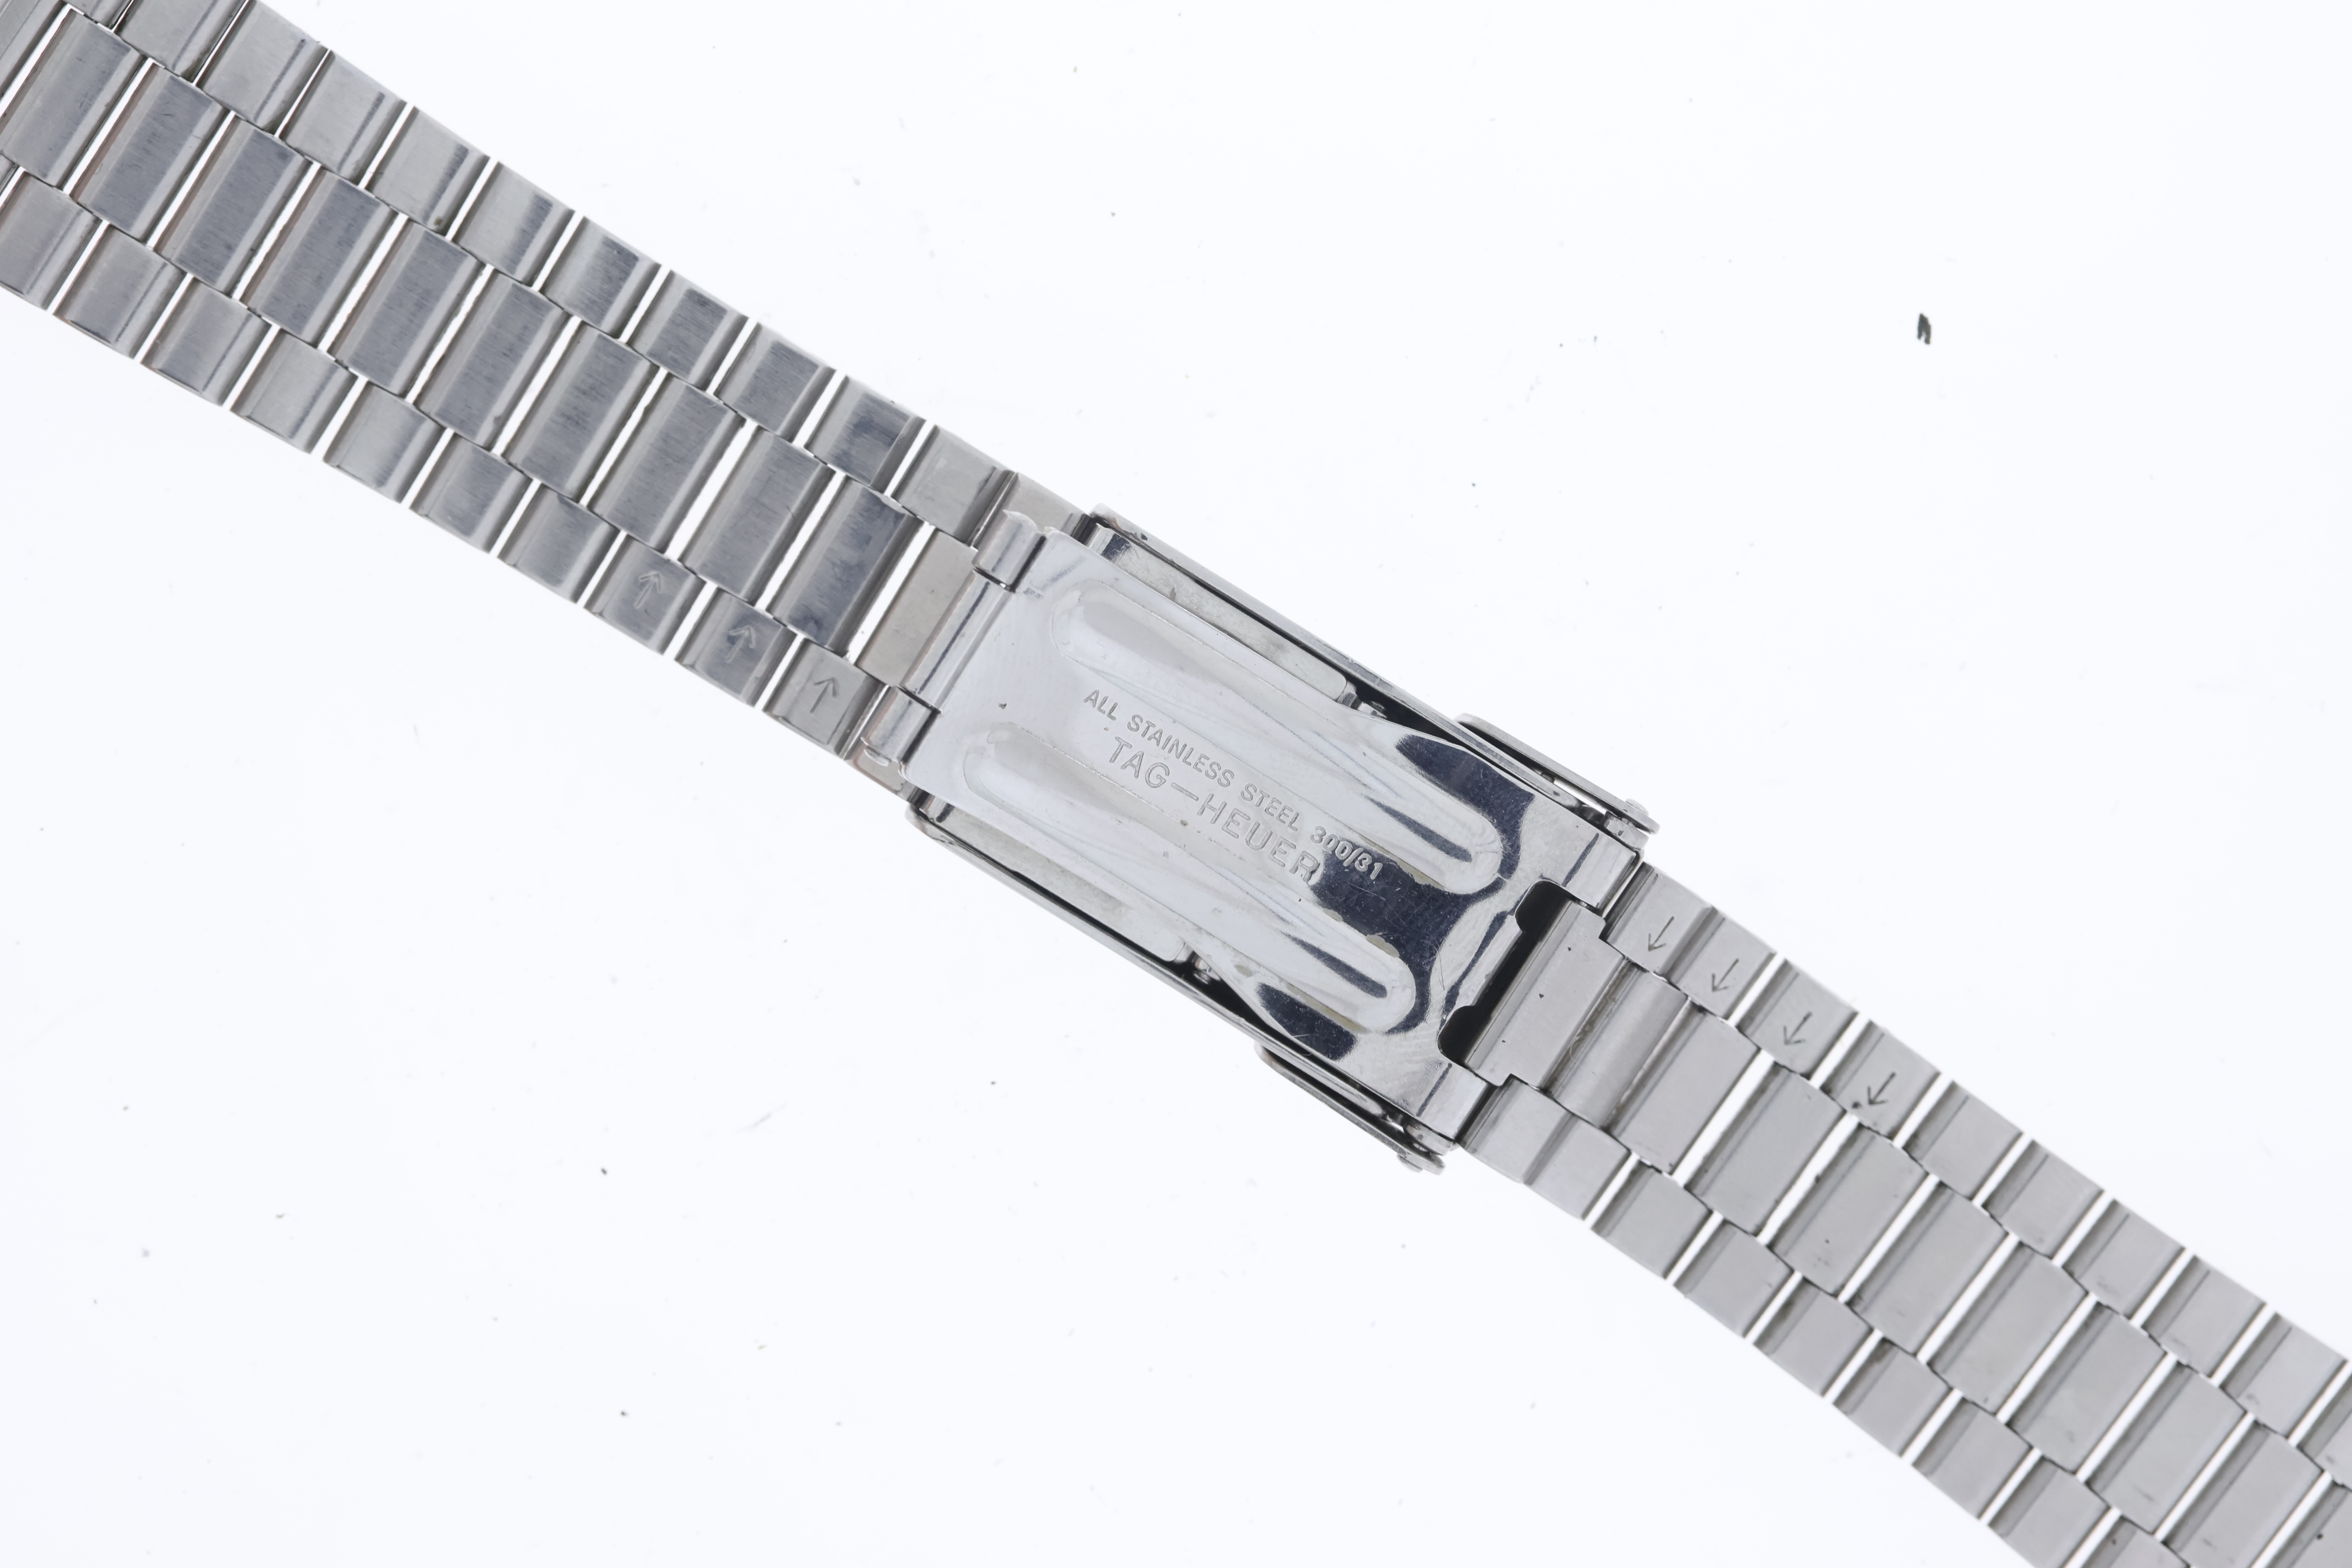 Tag Heuer 2000's 1st gen stainless steel bracelet with 20mm lugs. 150mm in length, 178 extended - Image 4 of 4